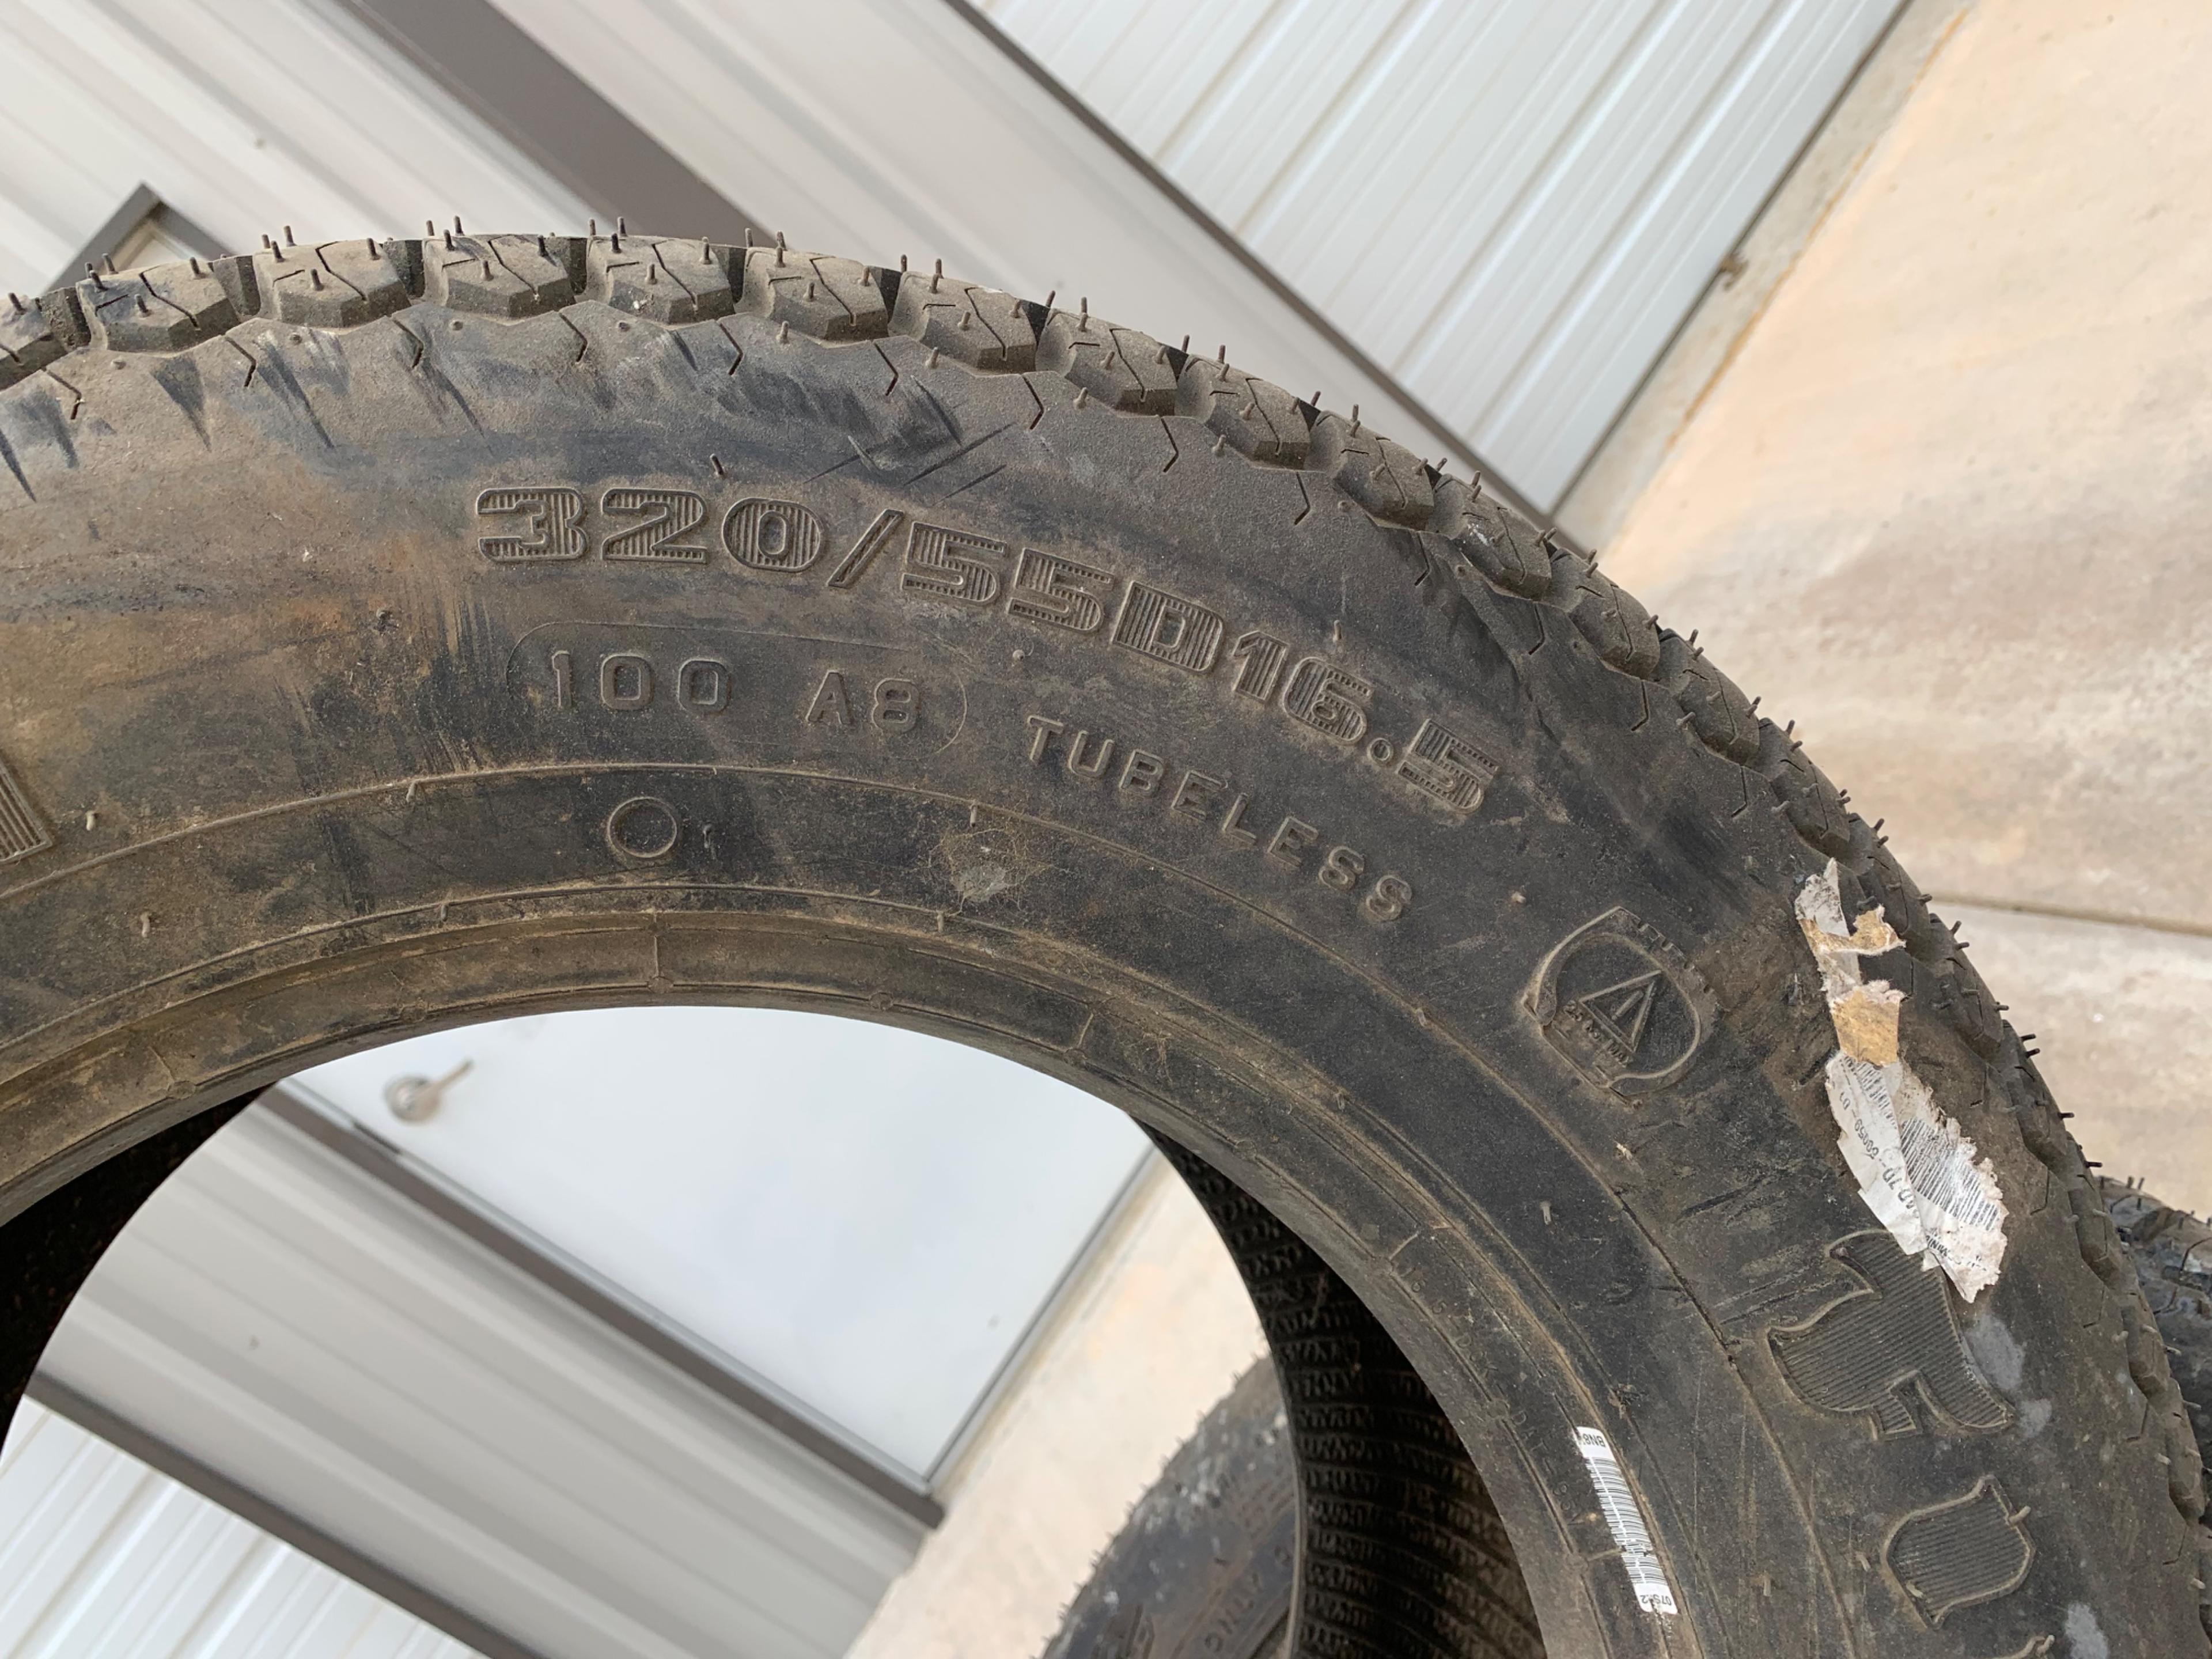 Firestone Agricultural / Lawn & Garden Bias Compact Tractor tire